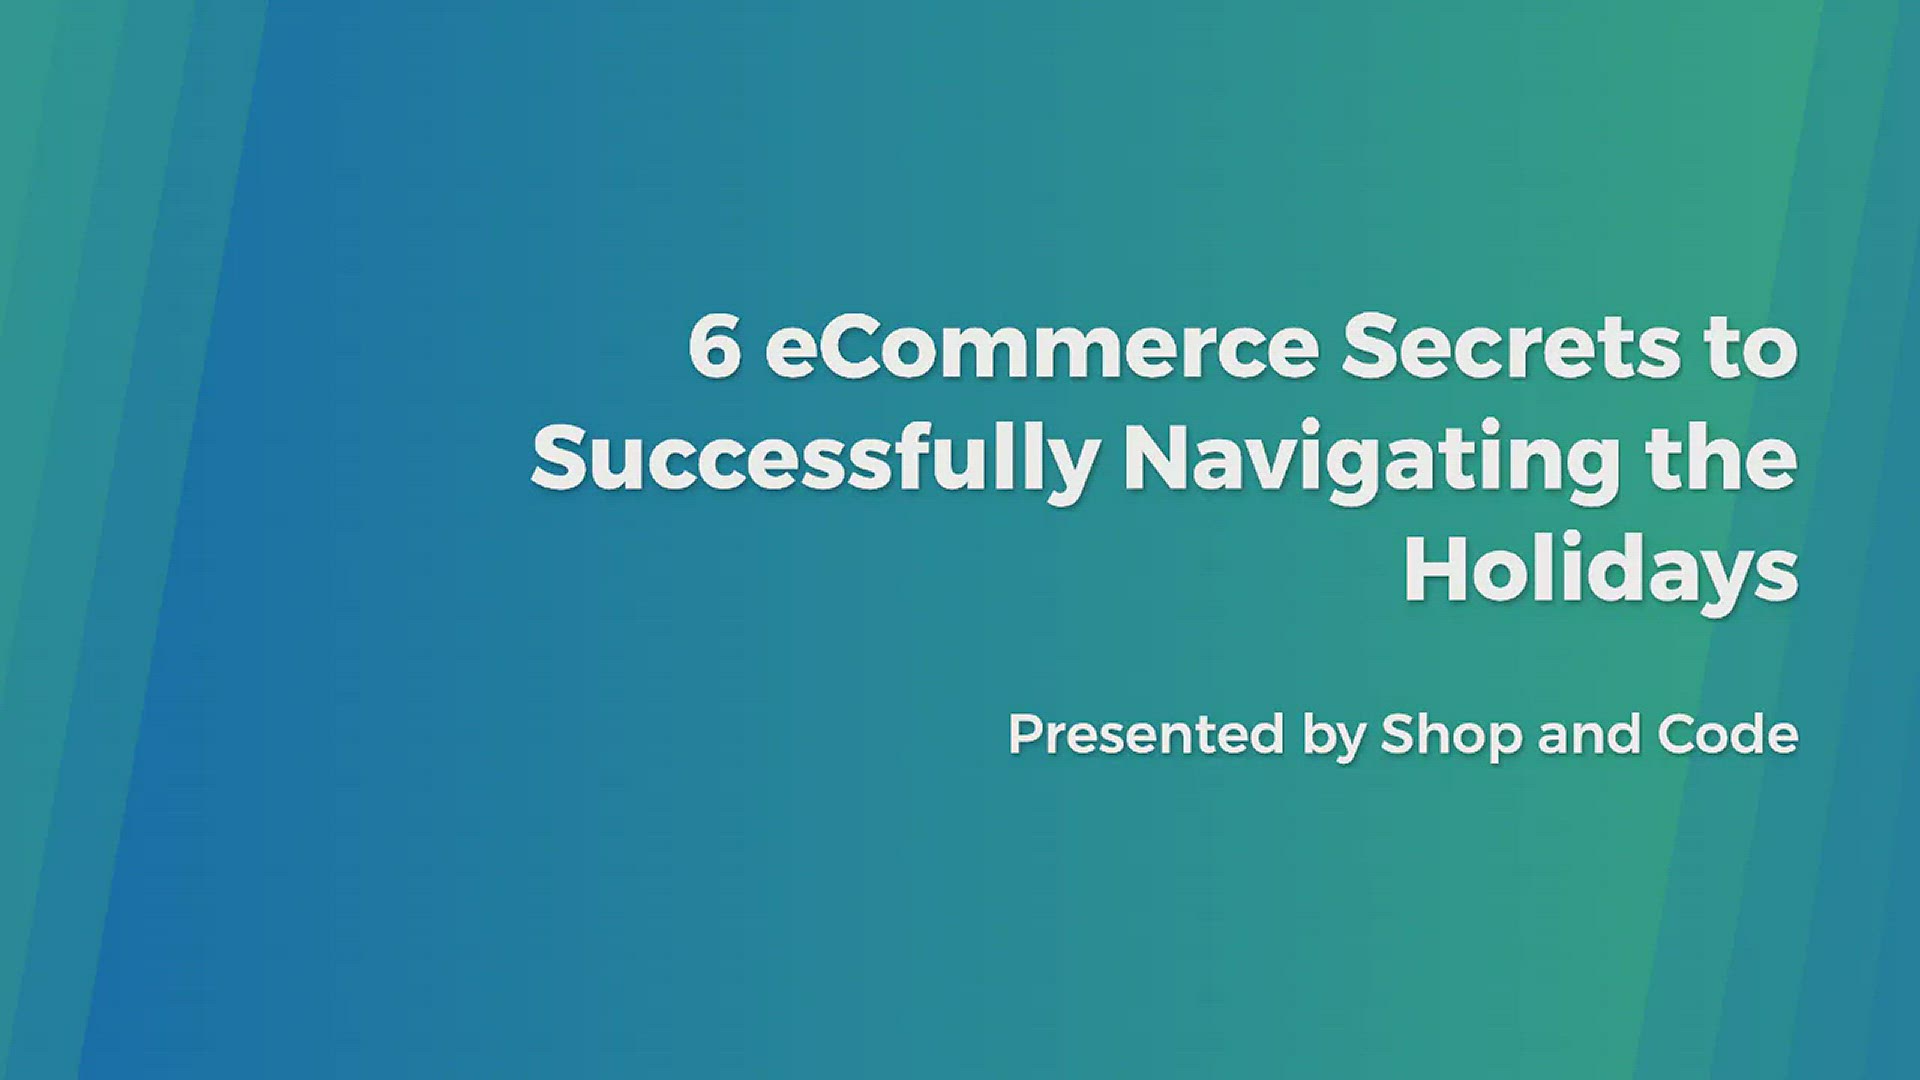 'Video thumbnail for 6 eCommerce Secrets to Successfully Navigating the Holidays'